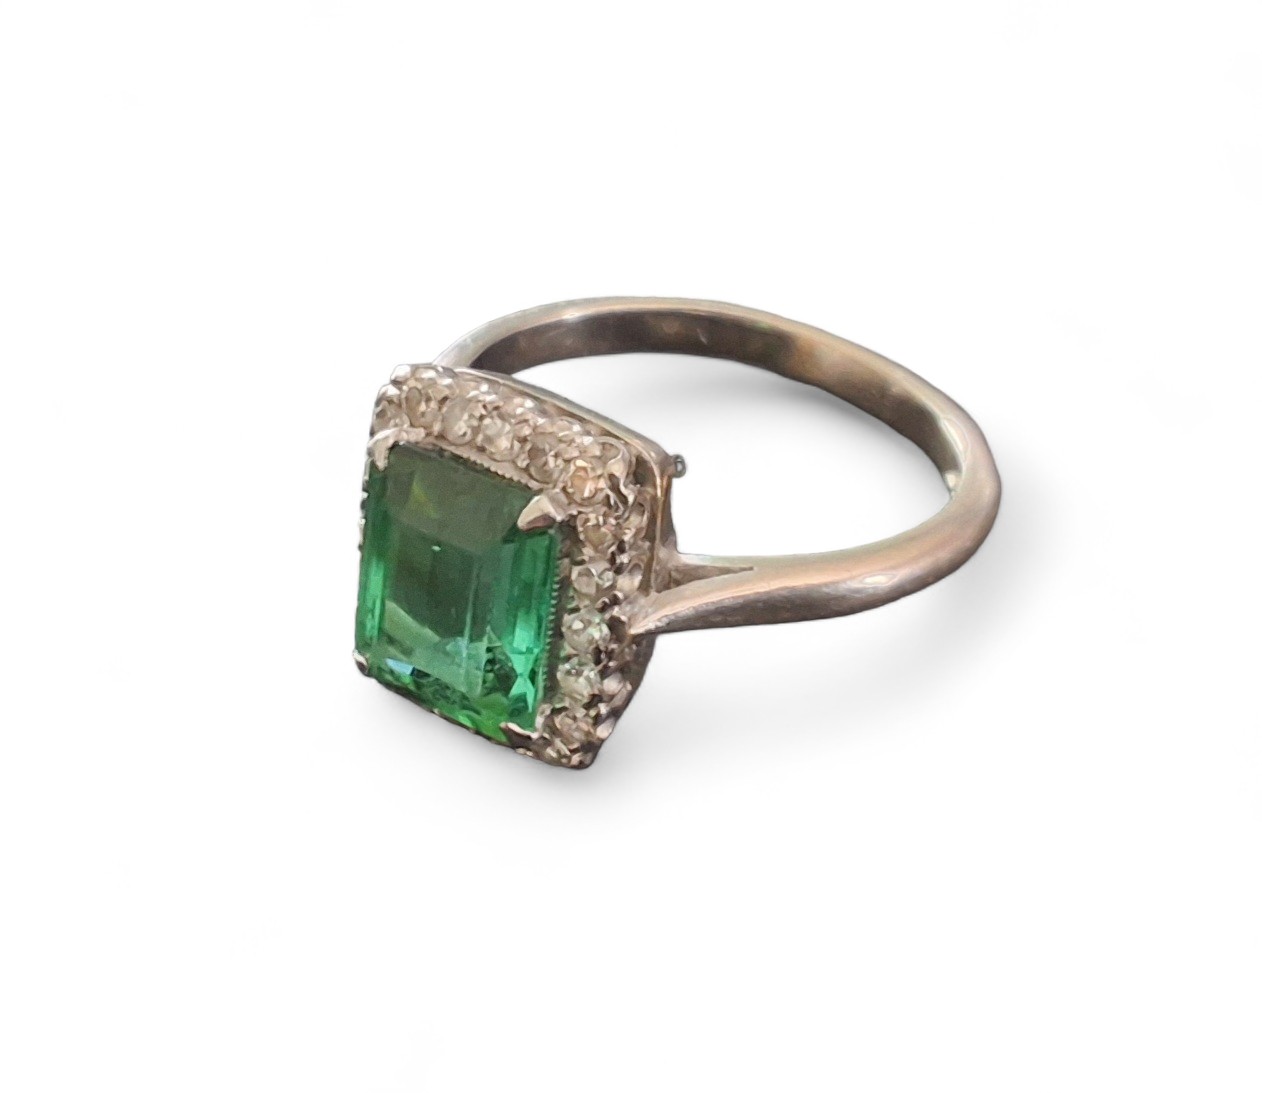 An 18ct white gold and Platinum ring, set with an emerald cut green Tourmaline, xx X xxmm within a